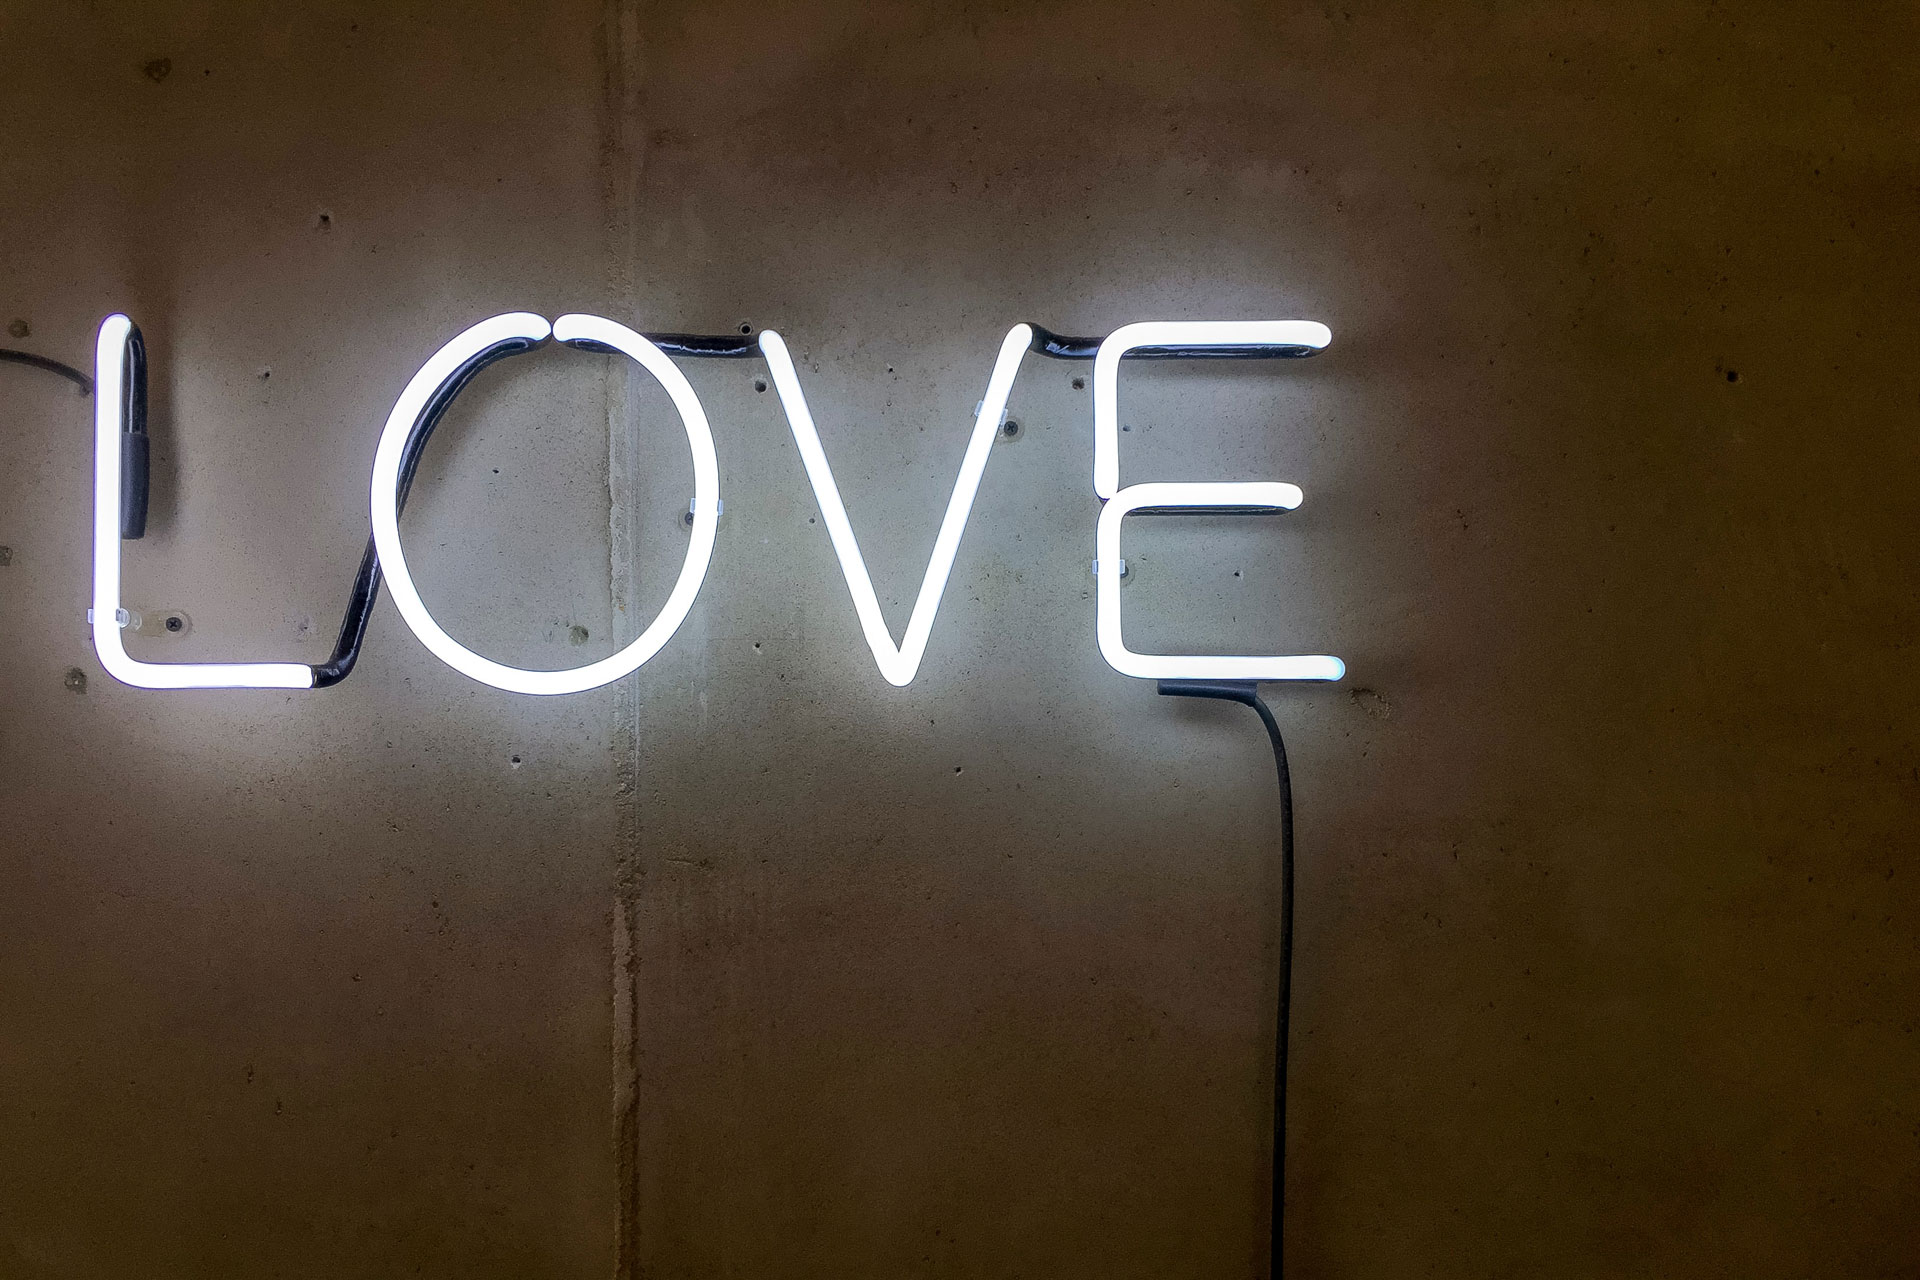 Love neon sign Photo by Etienne Girardet